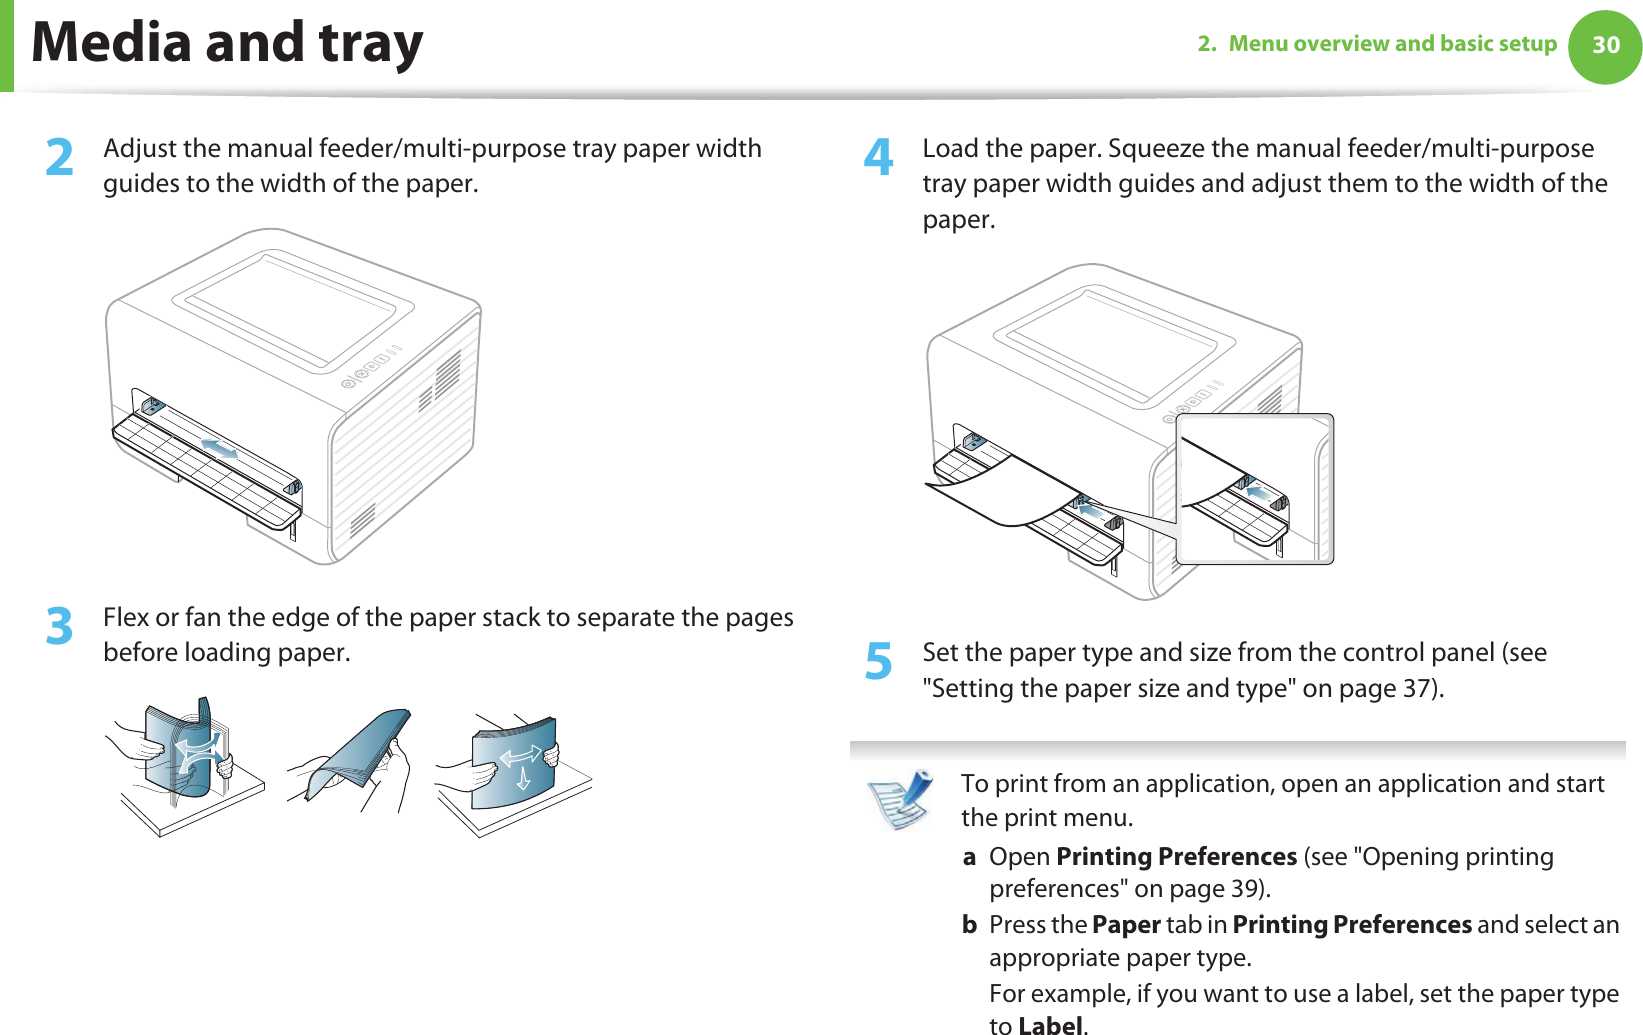 Media and tray 302. Menu overview and basic setup2  Adjust the manual feeder/multi-purpose tray paper width guides to the width of the paper. 3  Flex or fan the edge of the paper stack to separate the pages before loading paper.4  Load the paper. Squeeze the manual feeder/multi-purpose tray paper width guides and adjust them to the width of the paper.5  Set the paper type and size from the control panel (see &quot;Setting the paper size and type&quot; on page 37). To print from an application, open an application and start the print menu.a  Open Printing Preferences (see &quot;Opening printing preferences&quot; on page 39).b  Press the Paper tab in Printing Preferences and select an appropriate paper type.For example, if you want to use a label, set the paper type to Label.